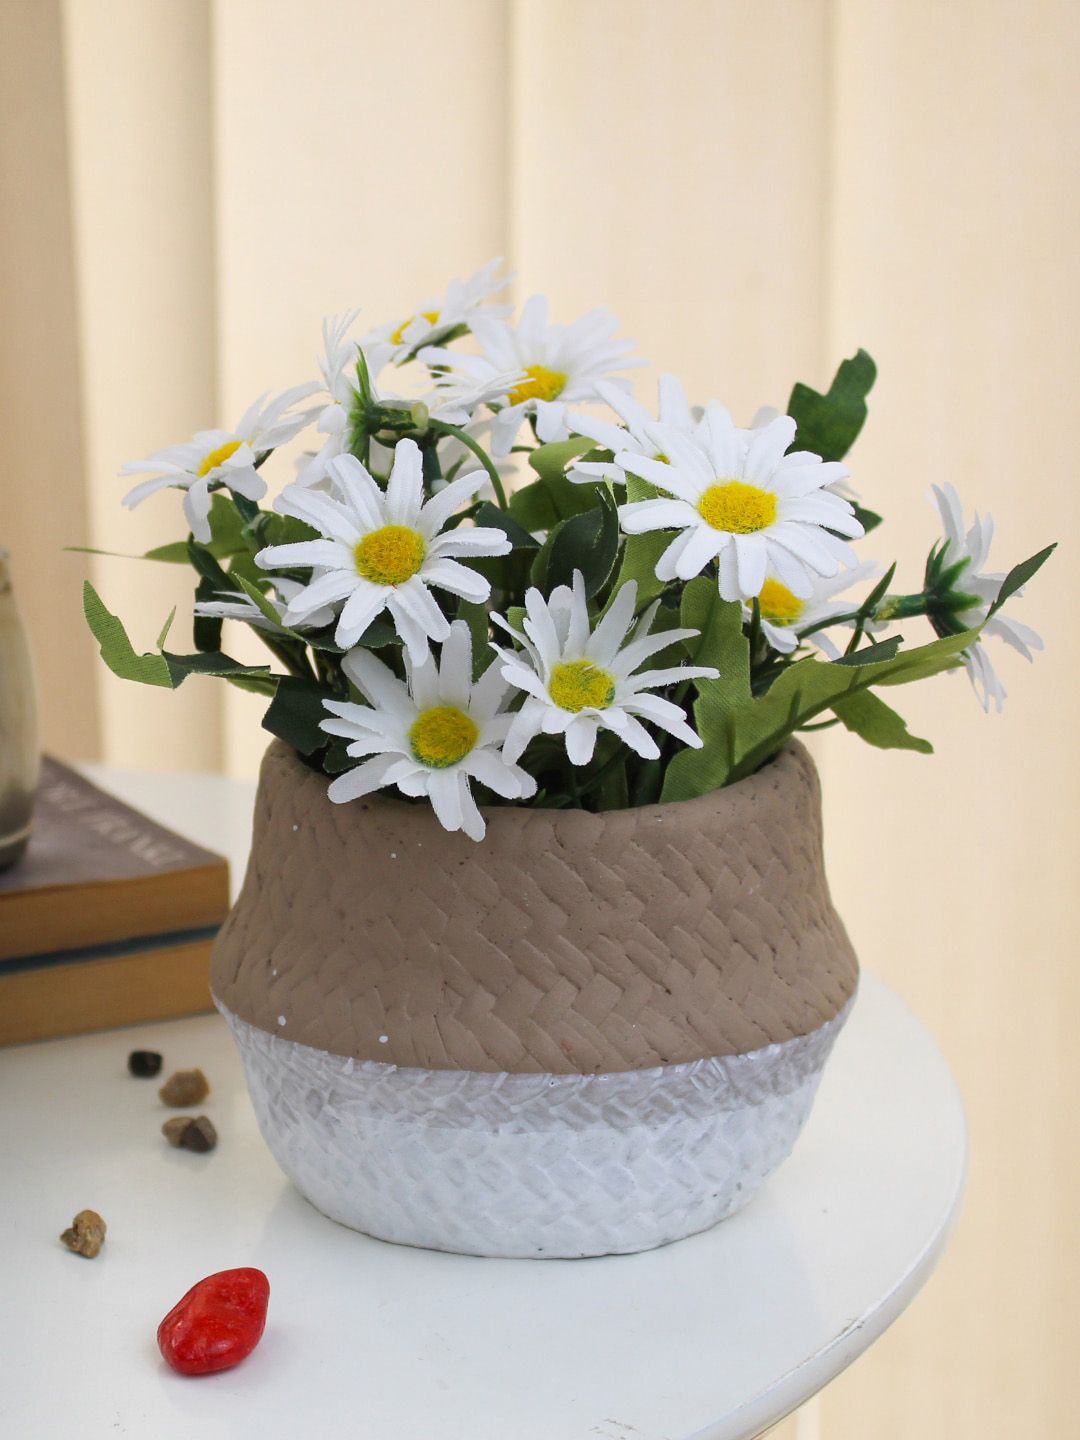 TIED RIBBONS White Daisy Artificial Flowers Plant With Pot Price in India